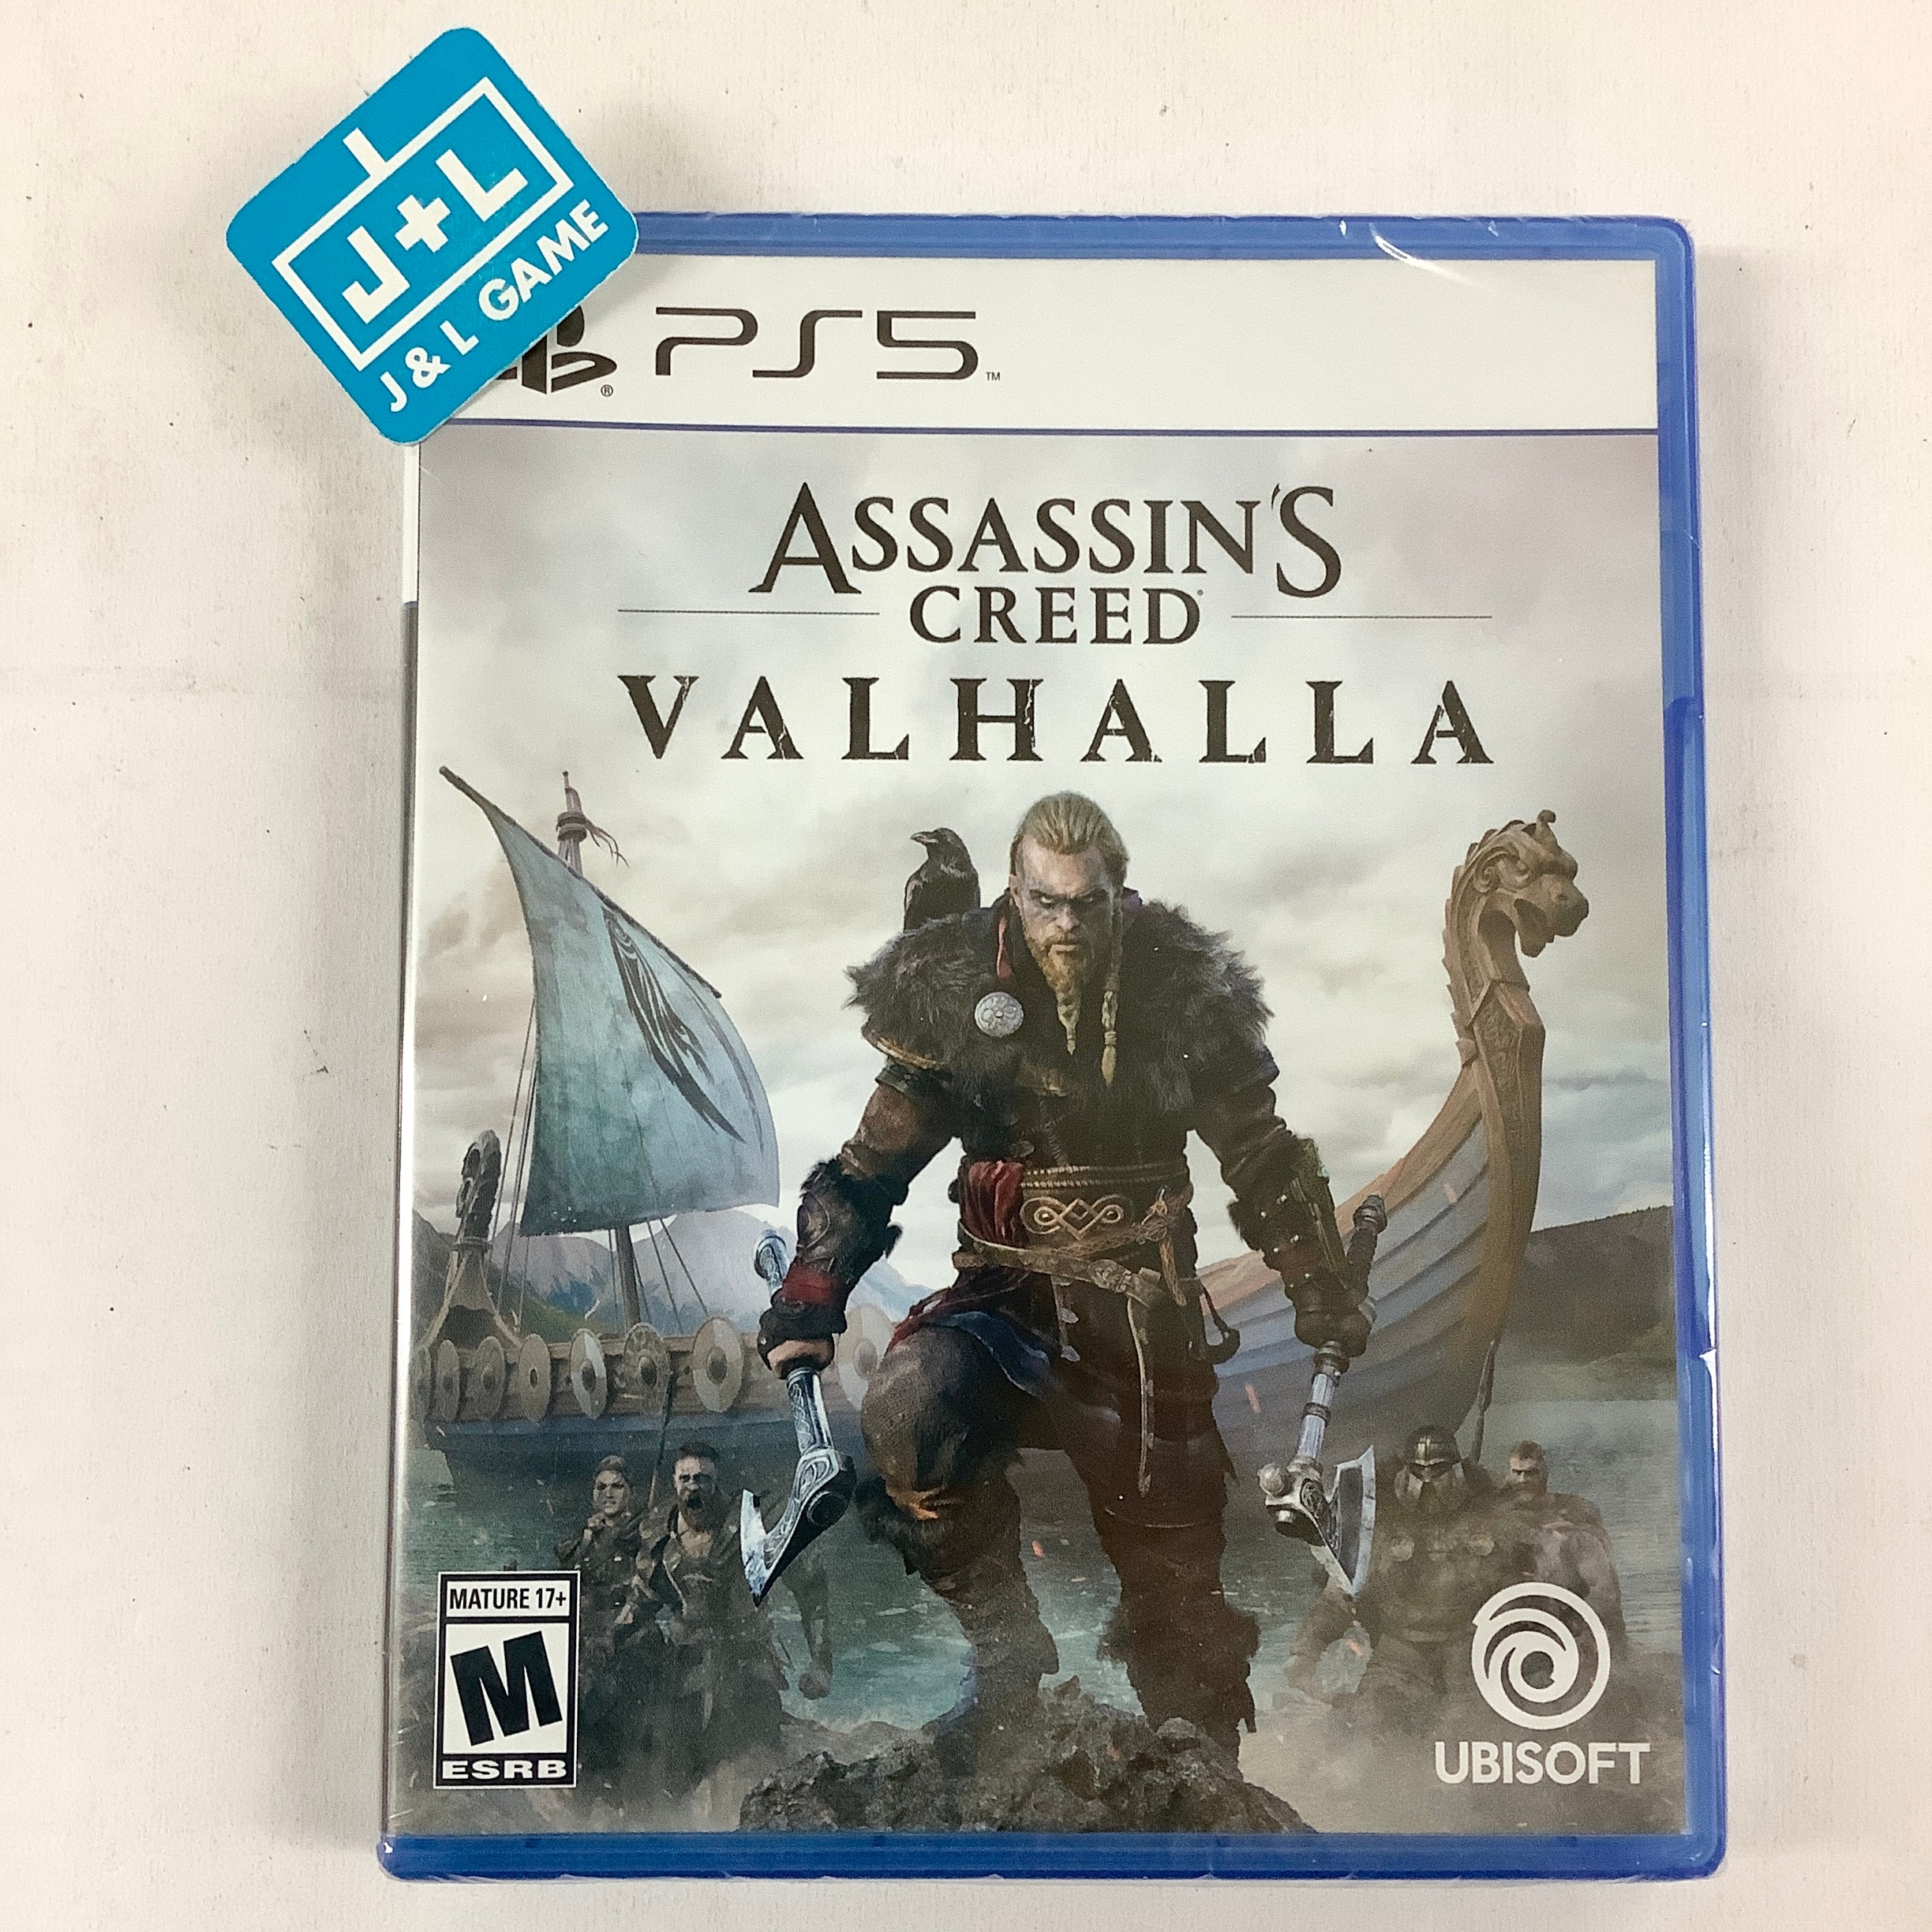 Assassin’s Creed Valhalla - (PS5) PlayStation 5 Video Games Ubisoft   